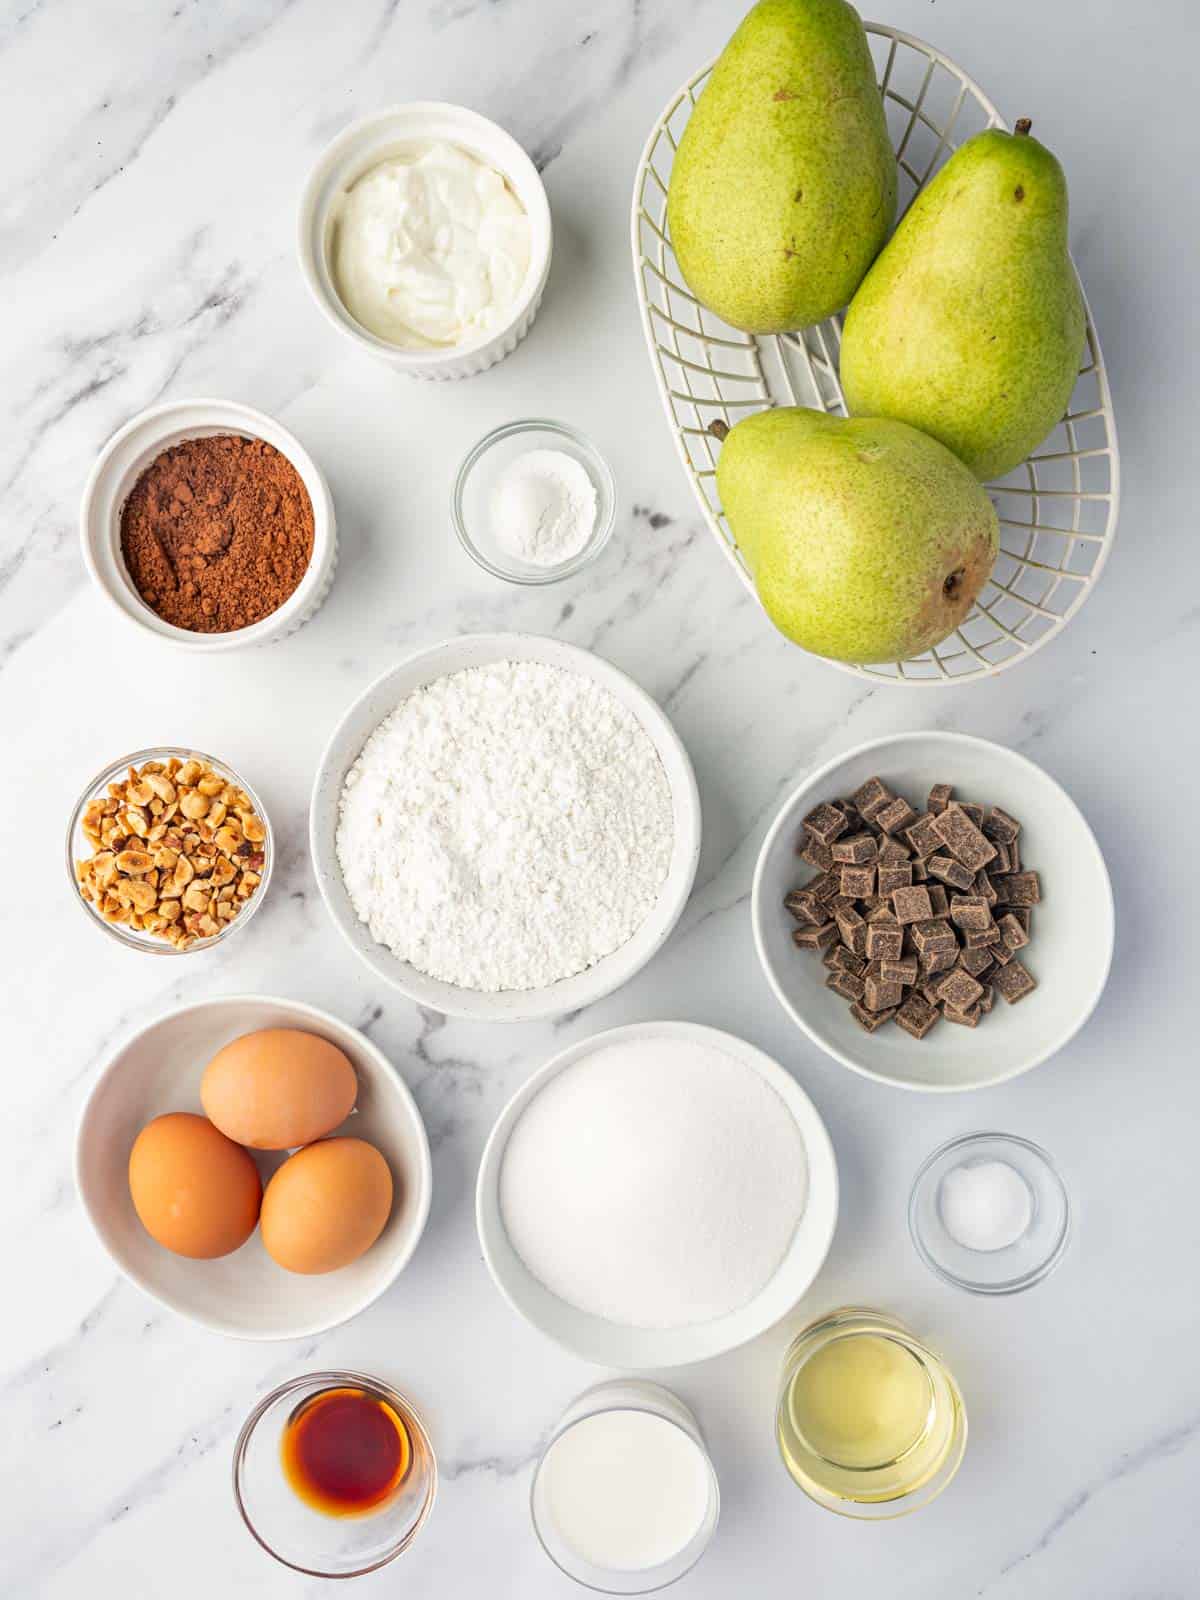 ingredients of chocolate pear cake laid out.